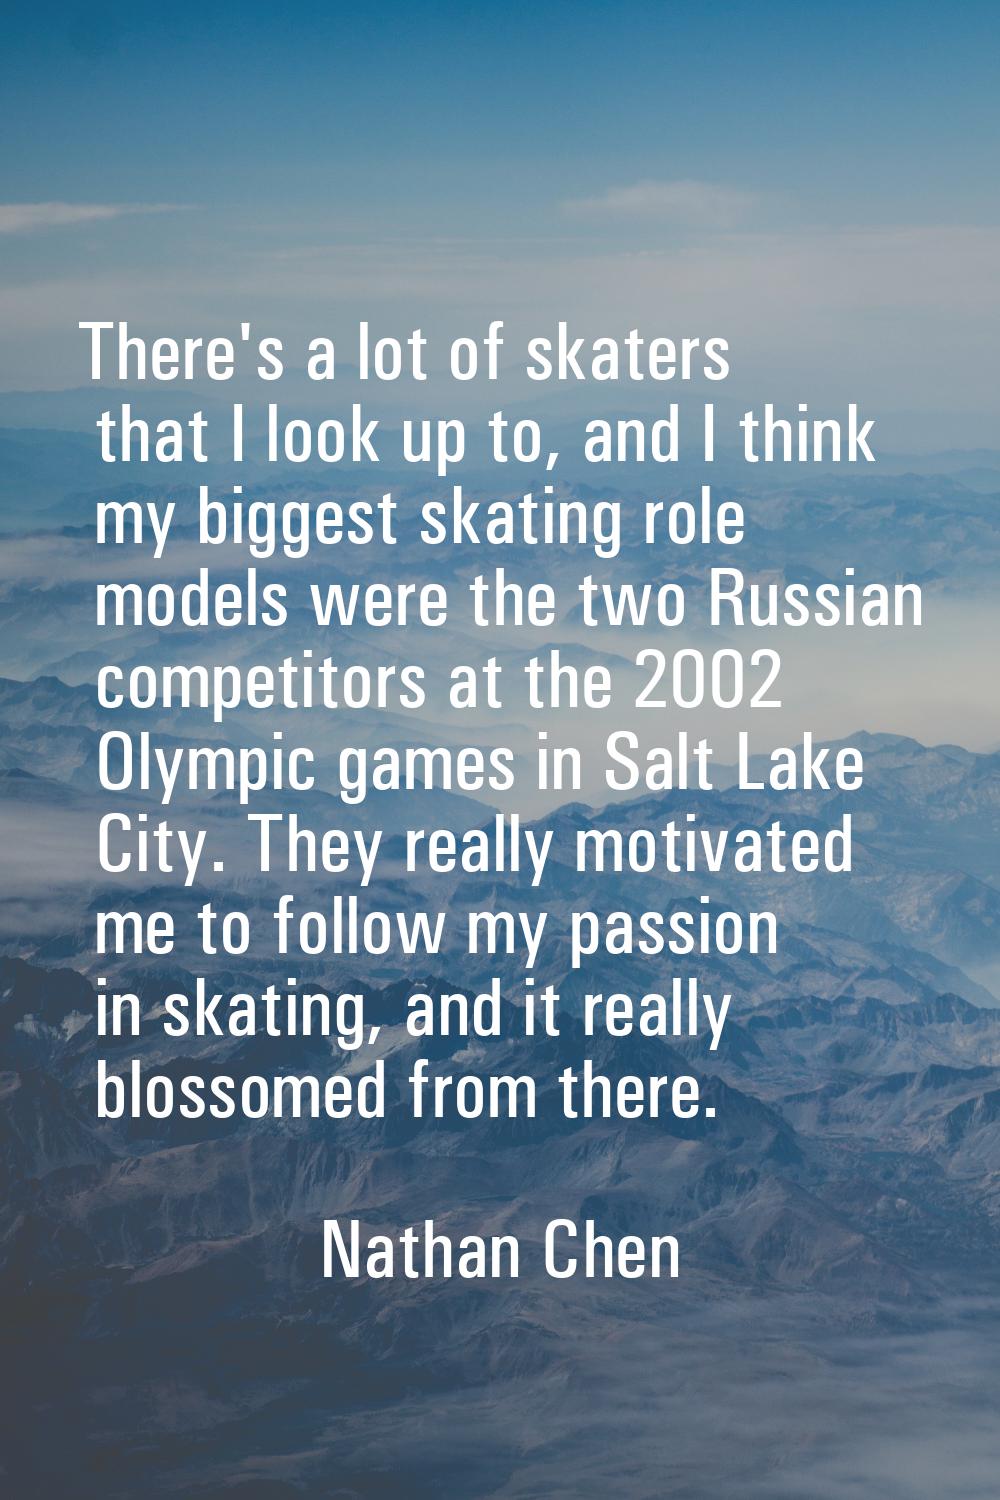 There's a lot of skaters that I look up to, and I think my biggest skating role models were the two